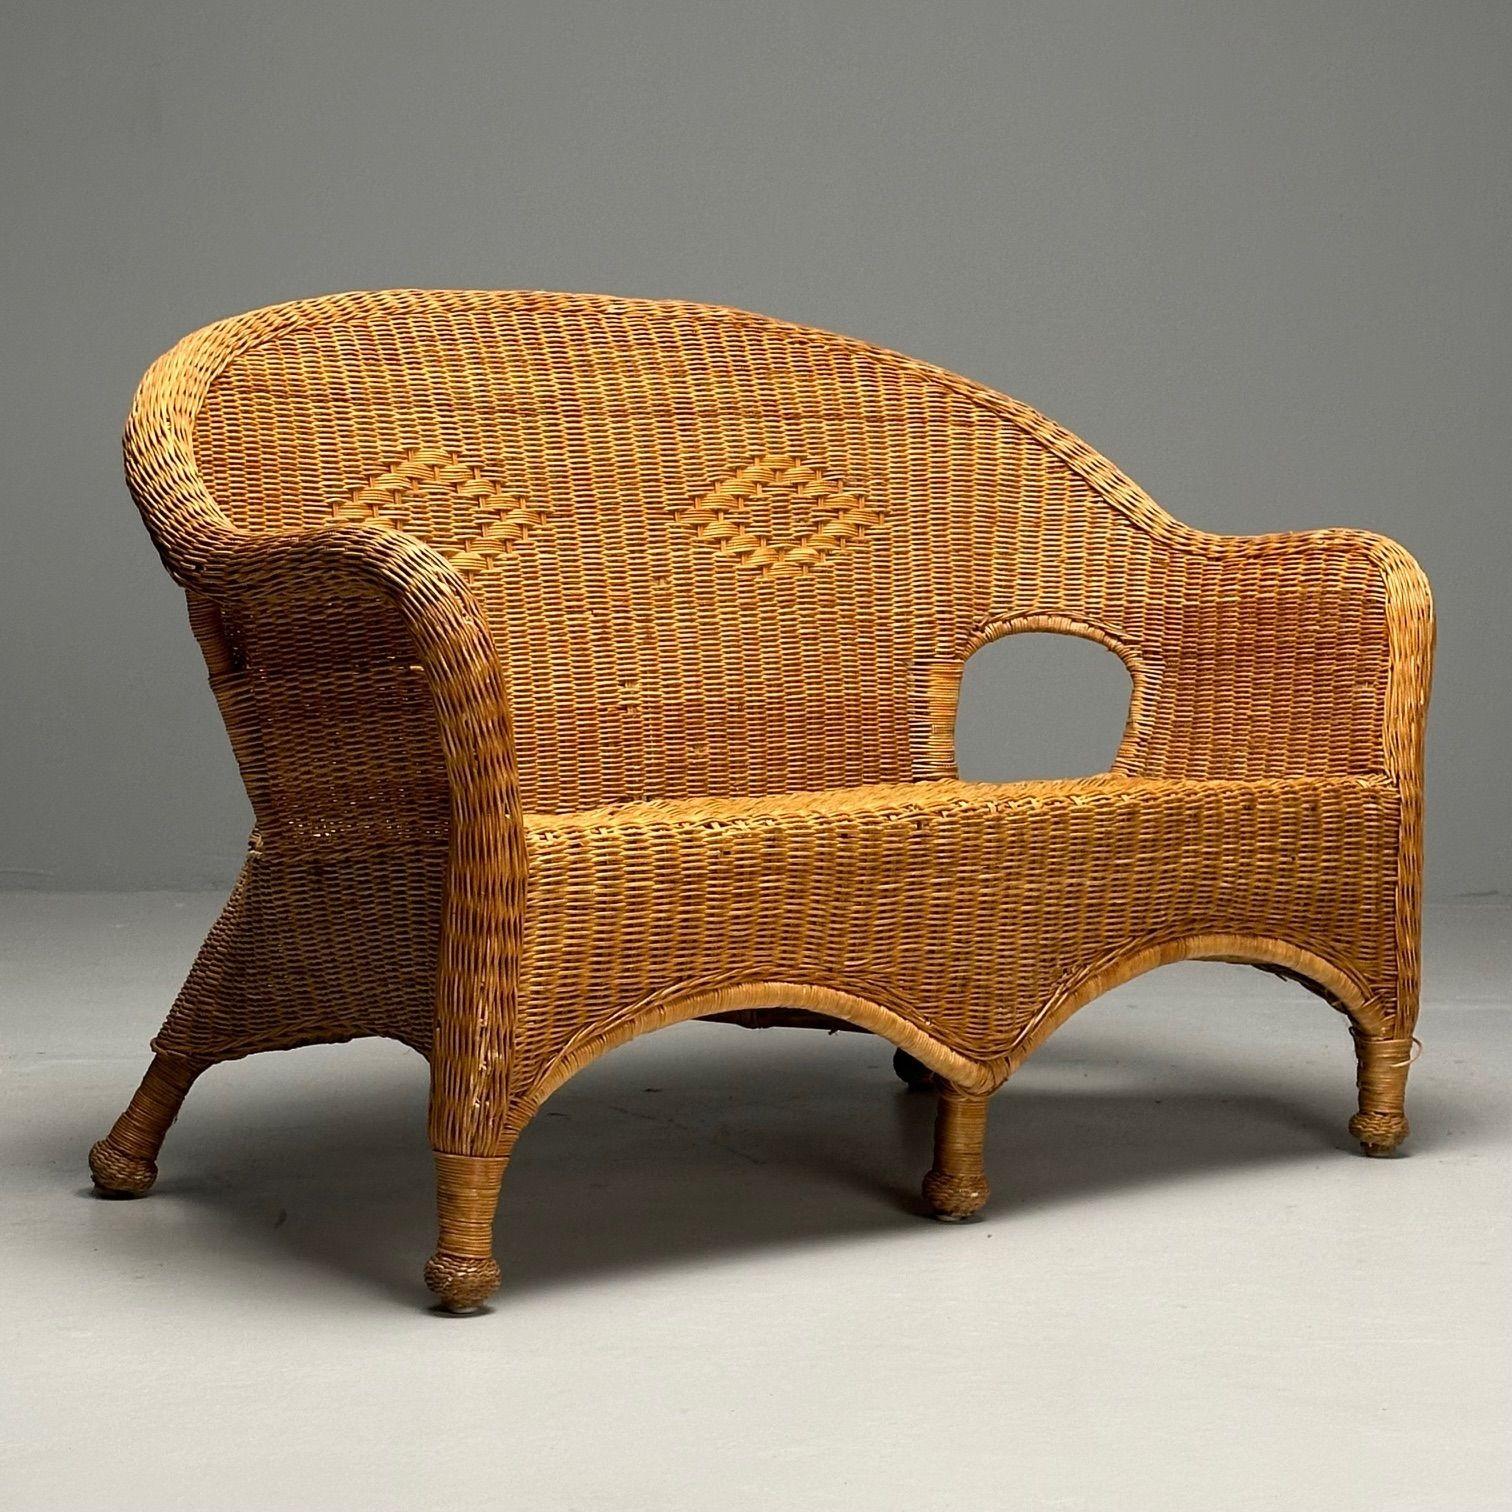 American Designer, Mid-Century Modern, Wicker Settee, USA, 1970s

Settee of hump back form with double diamond back design in good condition. Minor breaks in wicker. Price well below market. See video for condition.

H 34 D 22 W 54 SH16